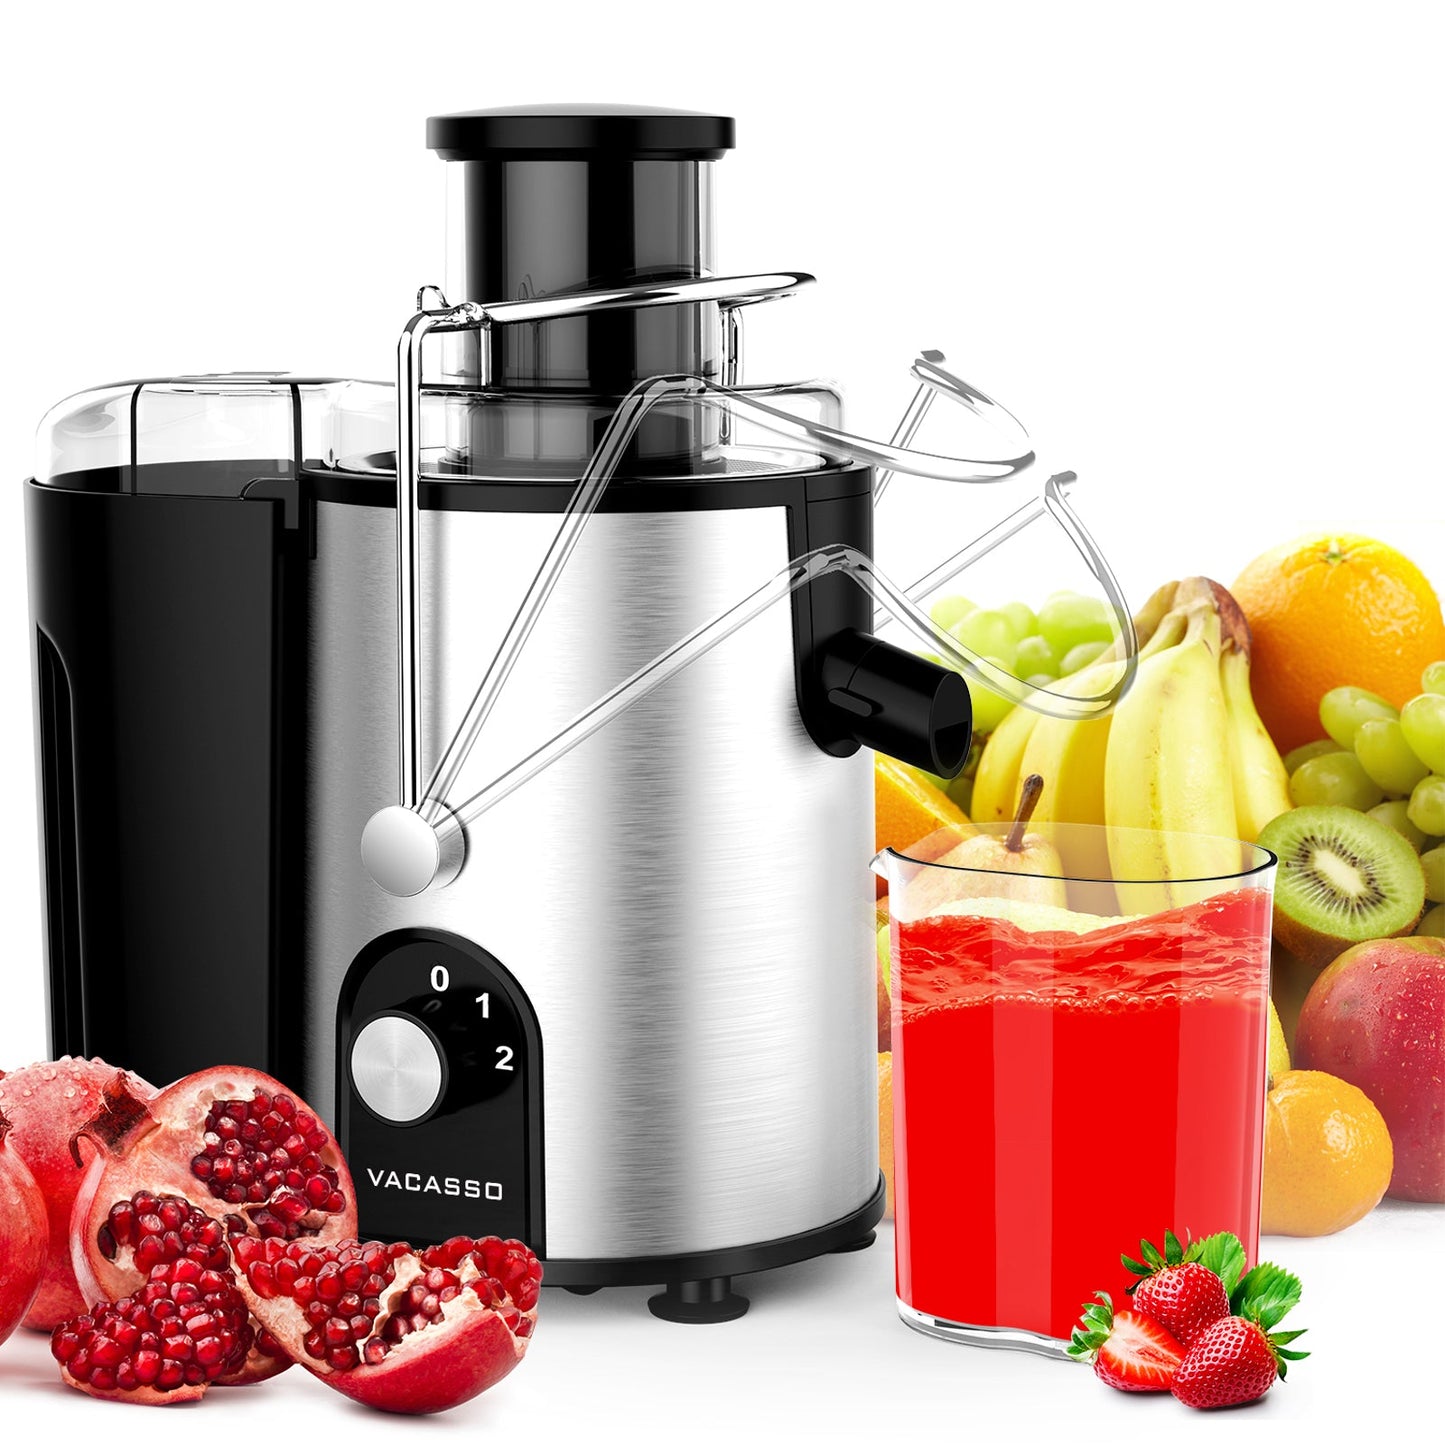 VACASSO Juicer Machine Easy to Clean with 2 Speeds for Lemon Citrus Celery Orange, 400W Centrifugal Juicer Extractor with Wide Mouth_0